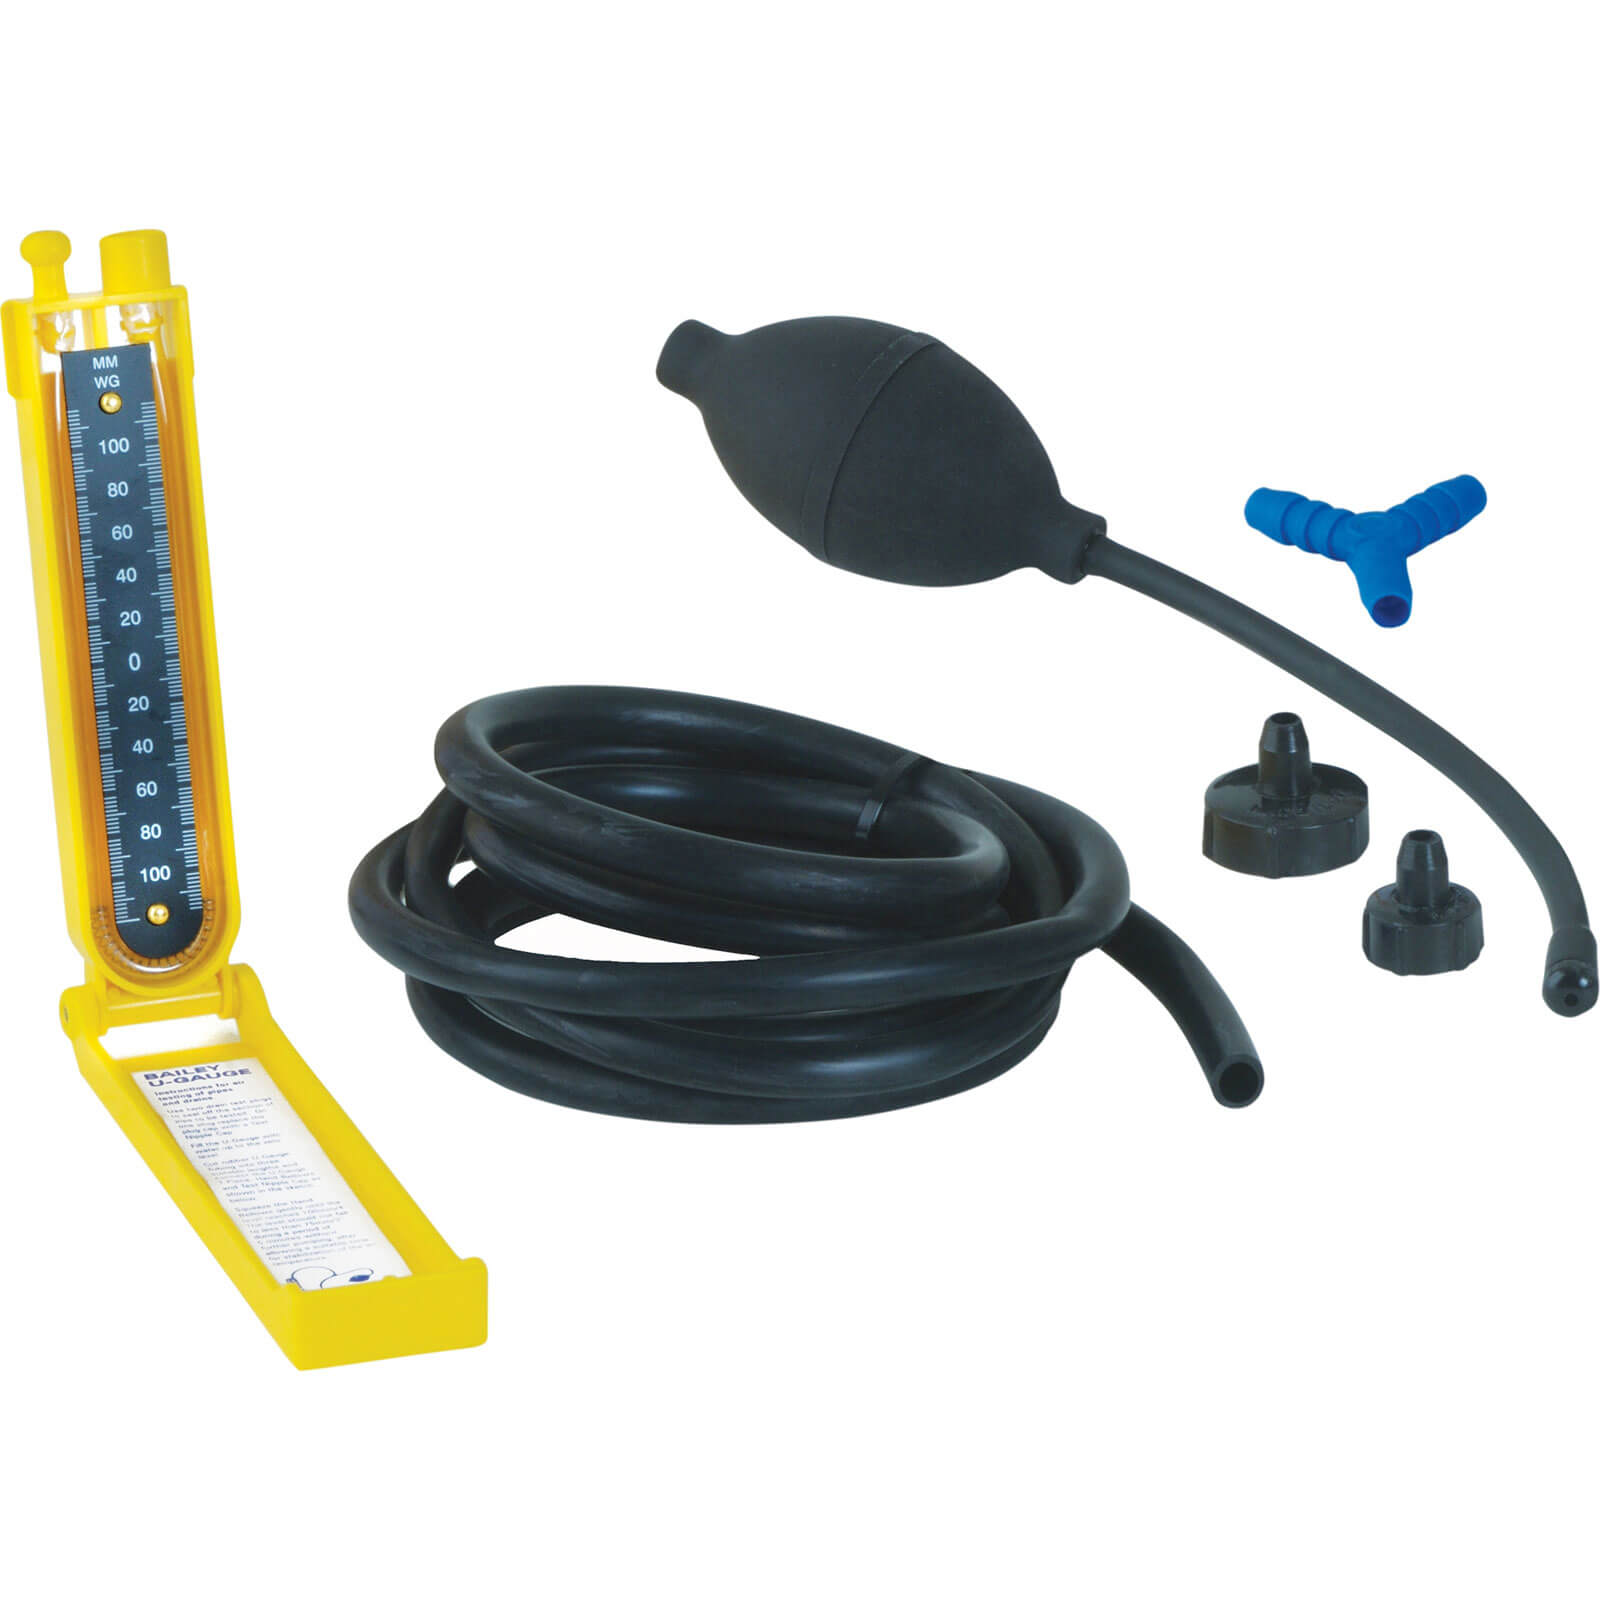 Bailey 4074 Complete Drain Test Kit